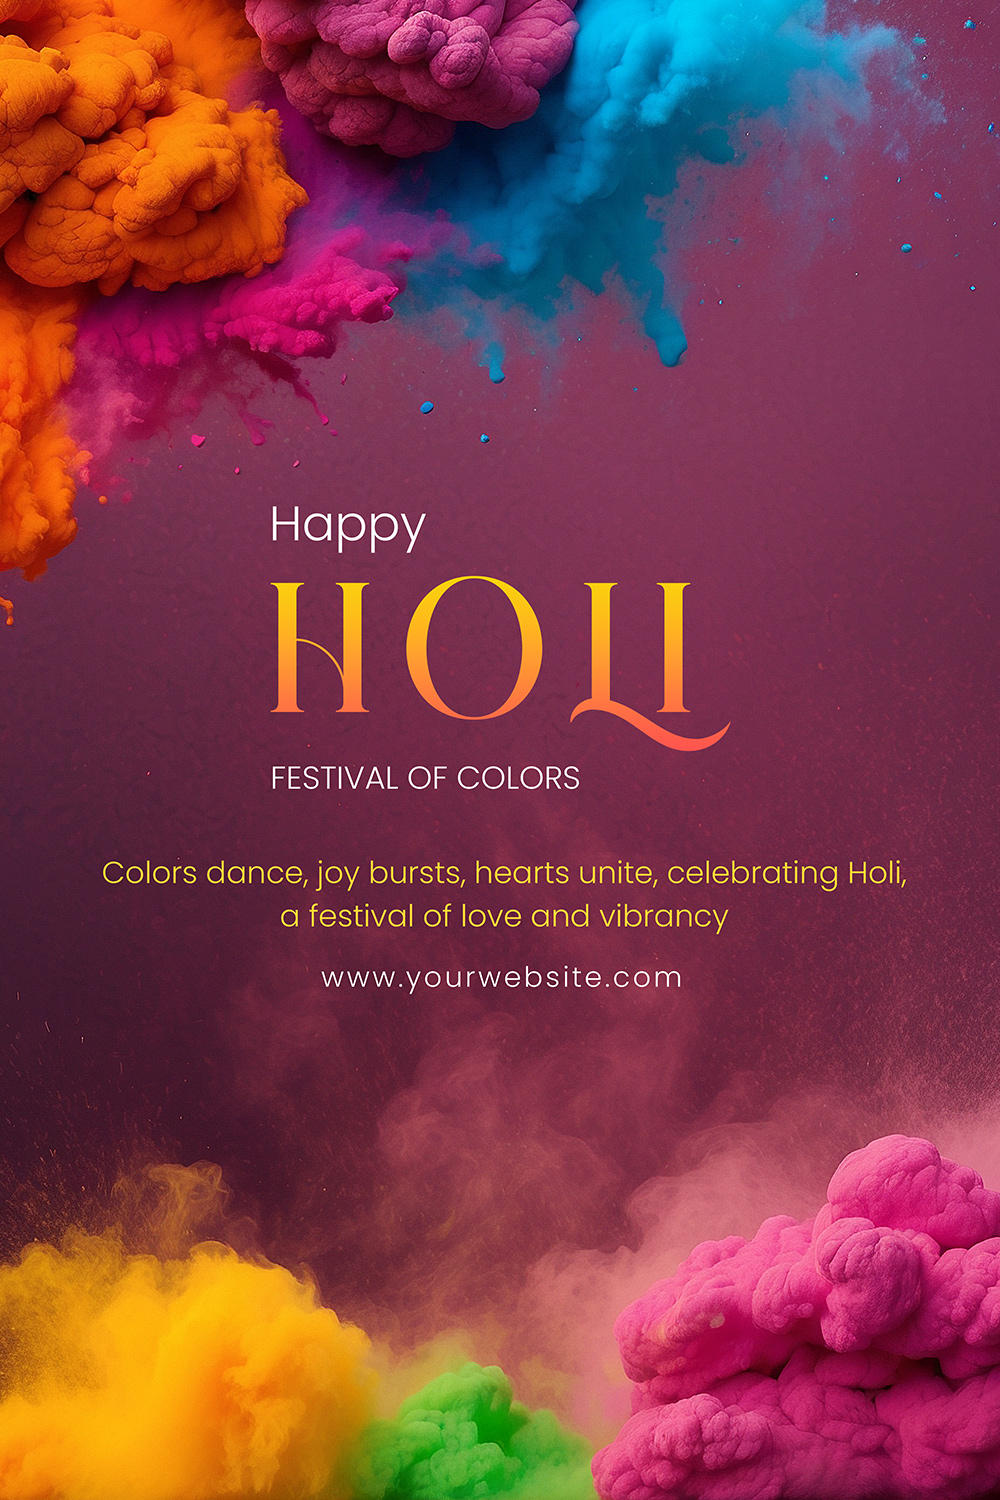 Concept of the Holi festival pinterest preview image.